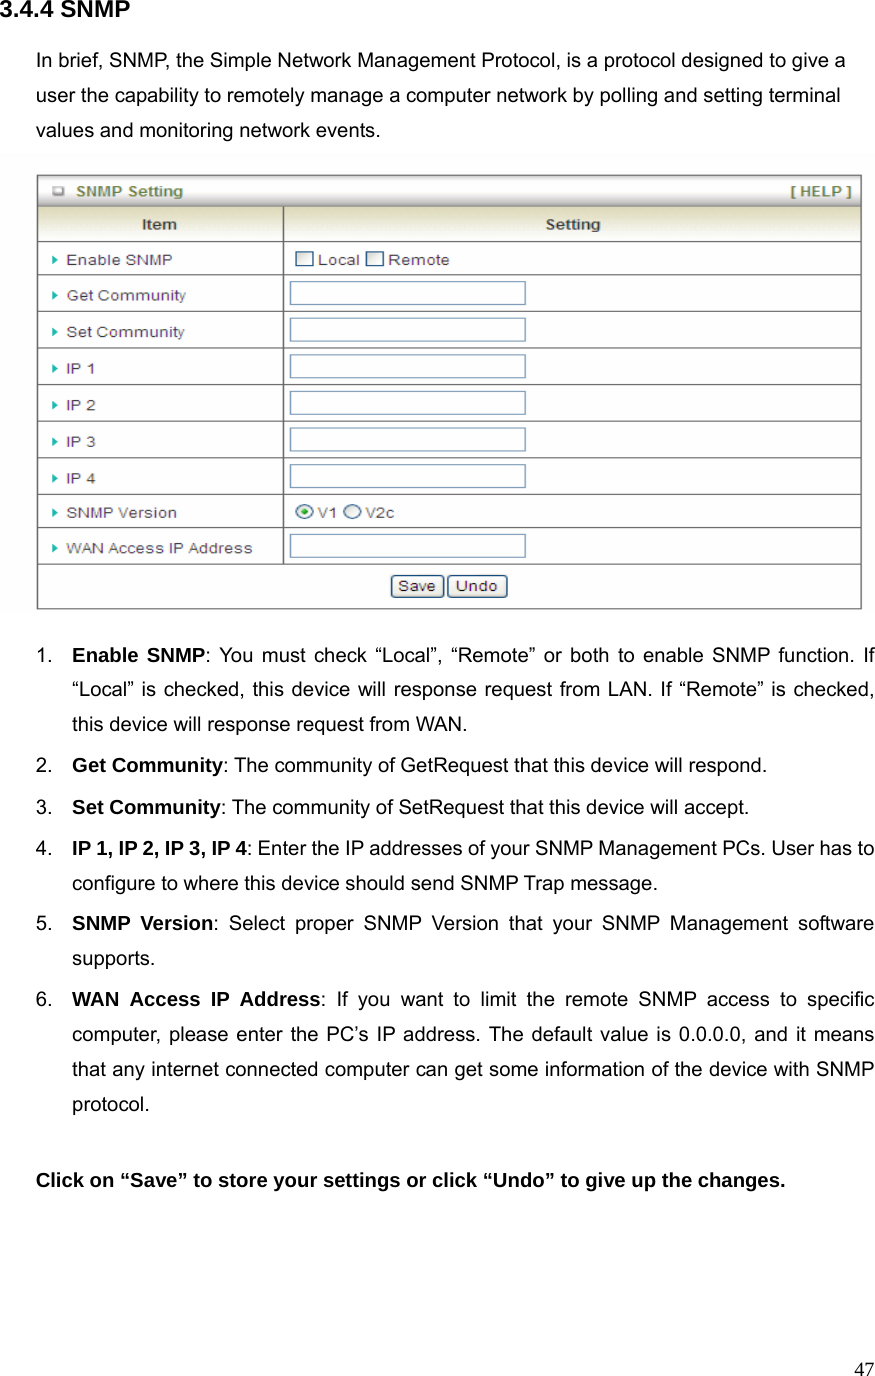  473.4.4 SNMP  In brief, SNMP, the Simple Network Management Protocol, is a protocol designed to give a user the capability to remotely manage a computer network by polling and setting terminal values and monitoring network events.     1.  Enable SNMP: You must check “Local”, “Remote” or both to enable SNMP function. If “Local” is checked, this device will response request from LAN. If “Remote” is checked, this device will response request from WAN. 2.  Get Community: The community of GetRequest that this device will respond. 3.  Set Community: The community of SetRequest that this device will accept. 4.  IP 1, IP 2, IP 3, IP 4: Enter the IP addresses of your SNMP Management PCs. User has to configure to where this device should send SNMP Trap message. 5.  SNMP Version: Select proper SNMP Version that your SNMP Management software supports. 6.  WAN Access IP Address: If you want to limit the remote SNMP access to specific computer, please enter the PC’s IP address. The default value is 0.0.0.0, and it means that any internet connected computer can get some information of the device with SNMP protocol.  Click on “Save” to store your settings or click “Undo” to give up the changes.   